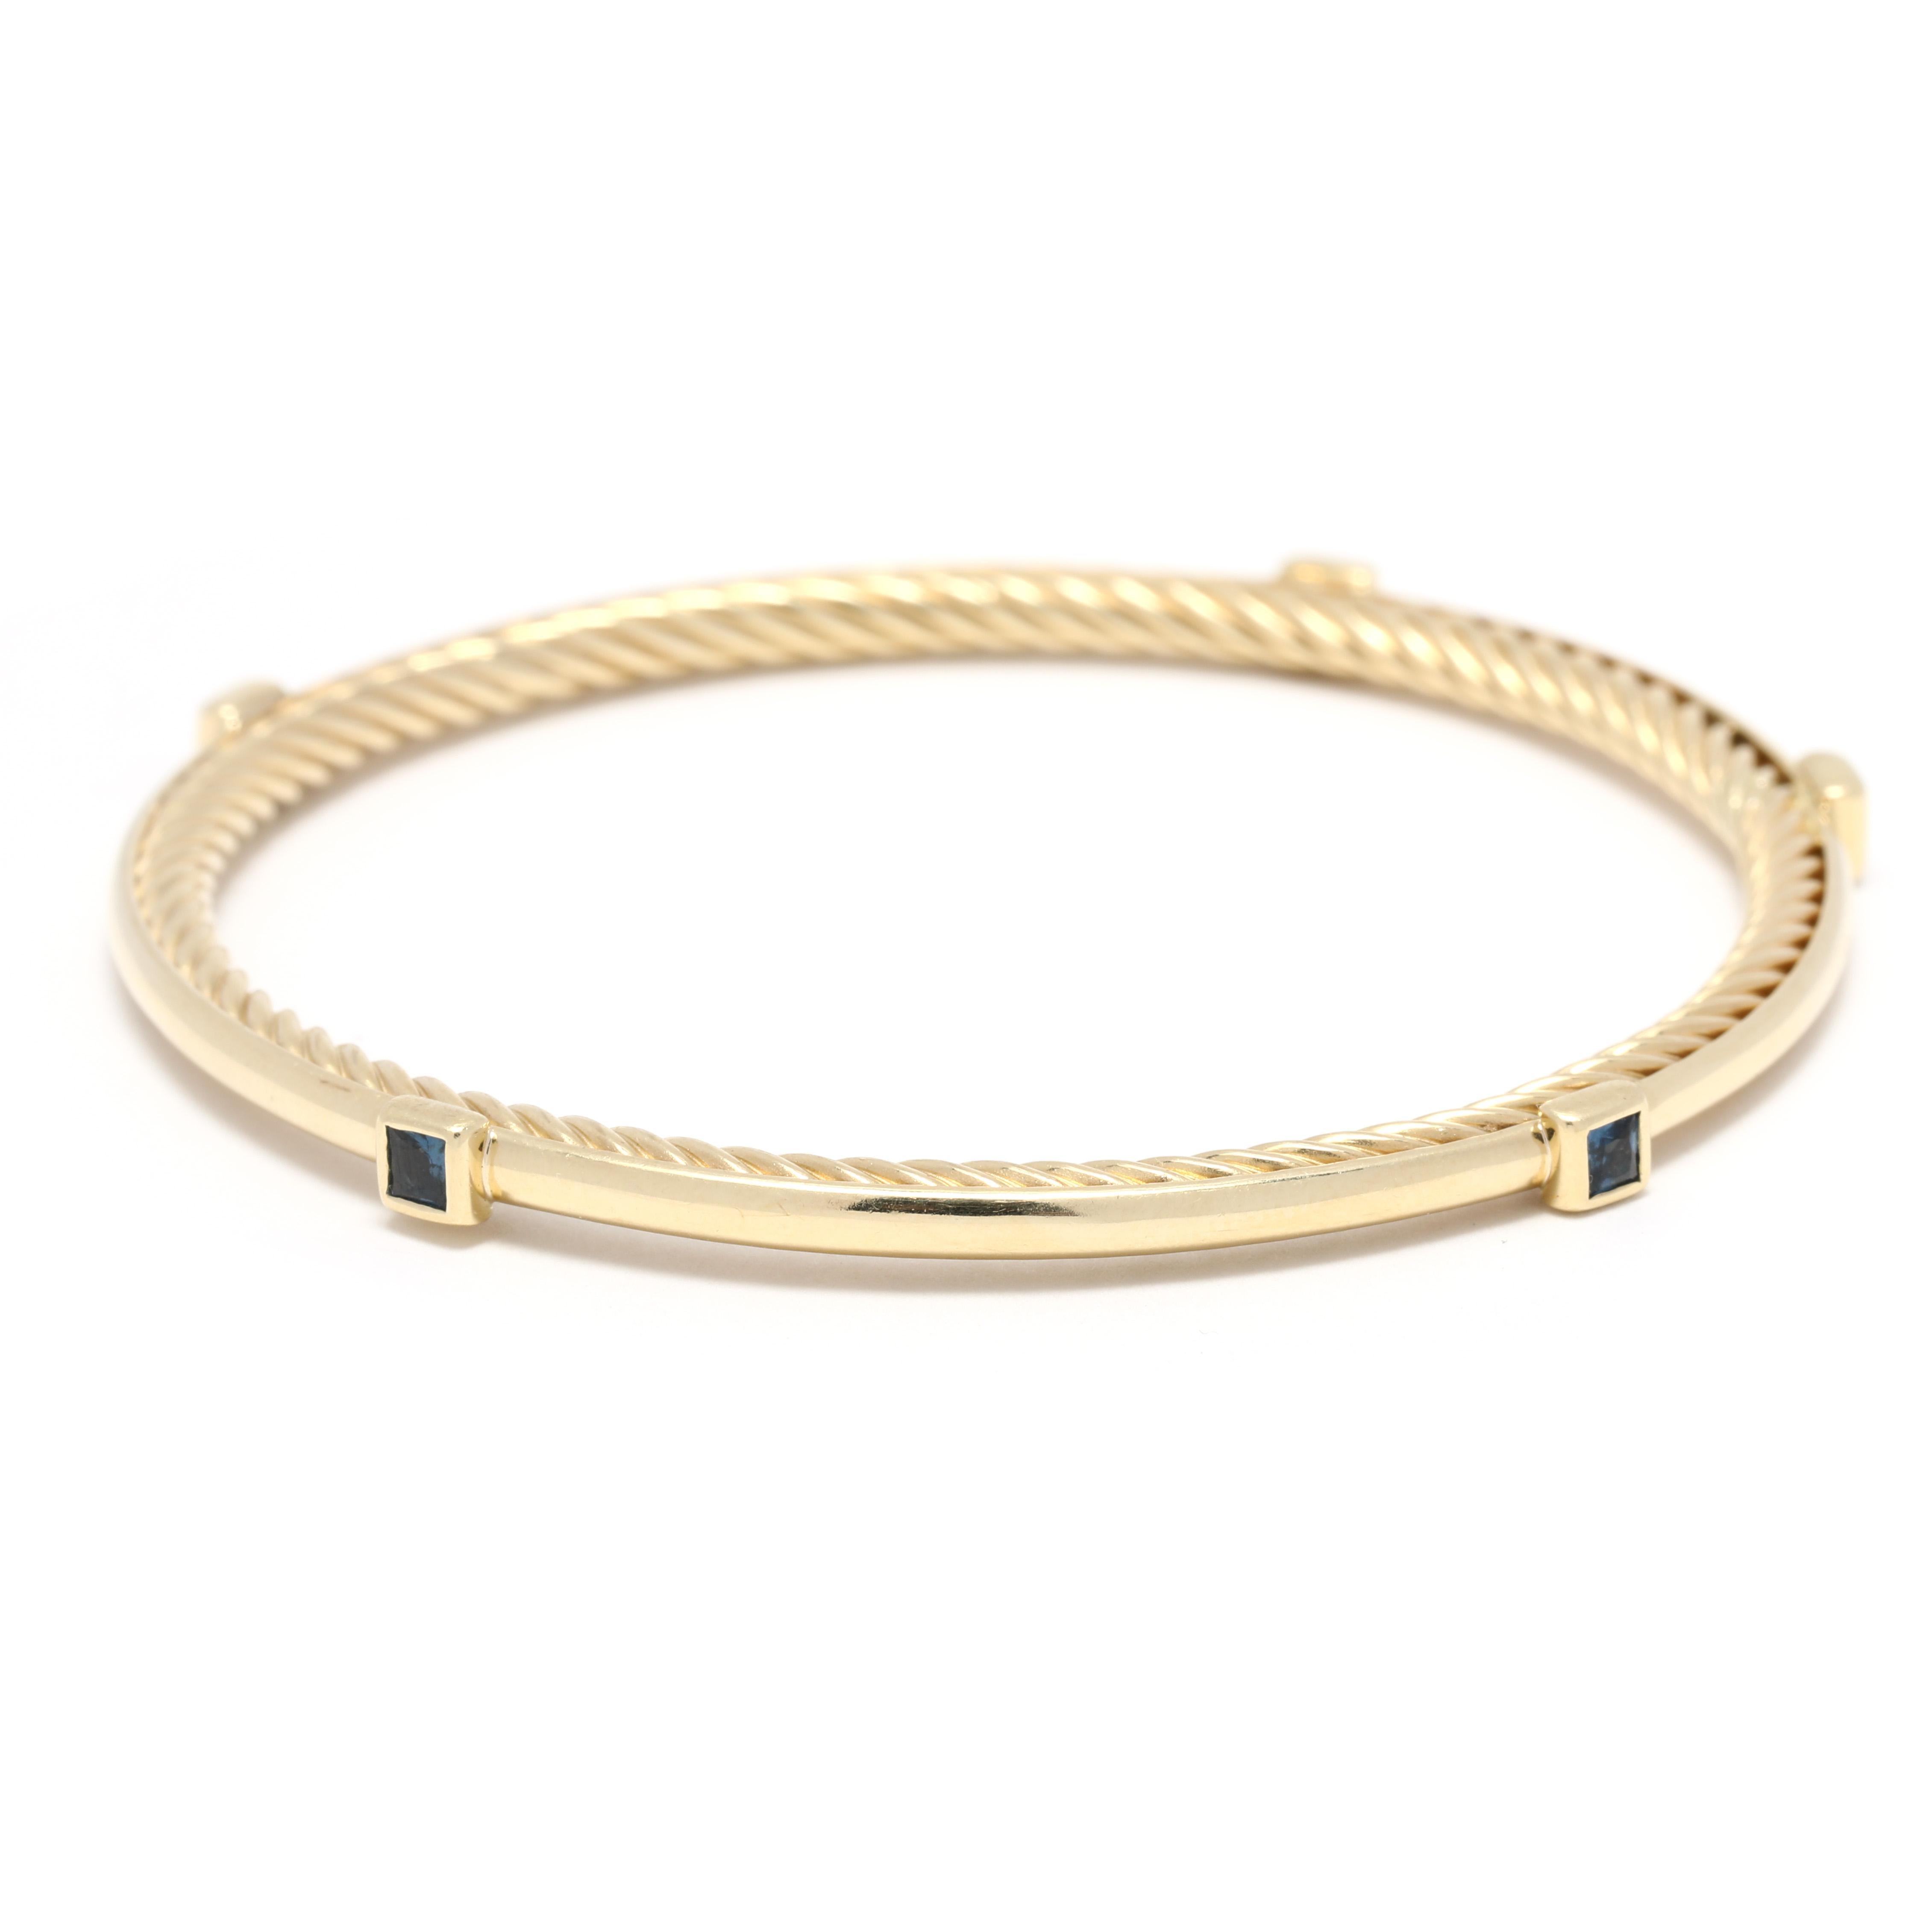 This stunning David Yurman .60ctw Sapphire Cable Bangle Bracelet is crafted in 18K Yellow Gold and features a length of 6.5 inches, making it a perfect choice for a small David Yurman bangle. Its unique cable design is embellished with .60ctw of